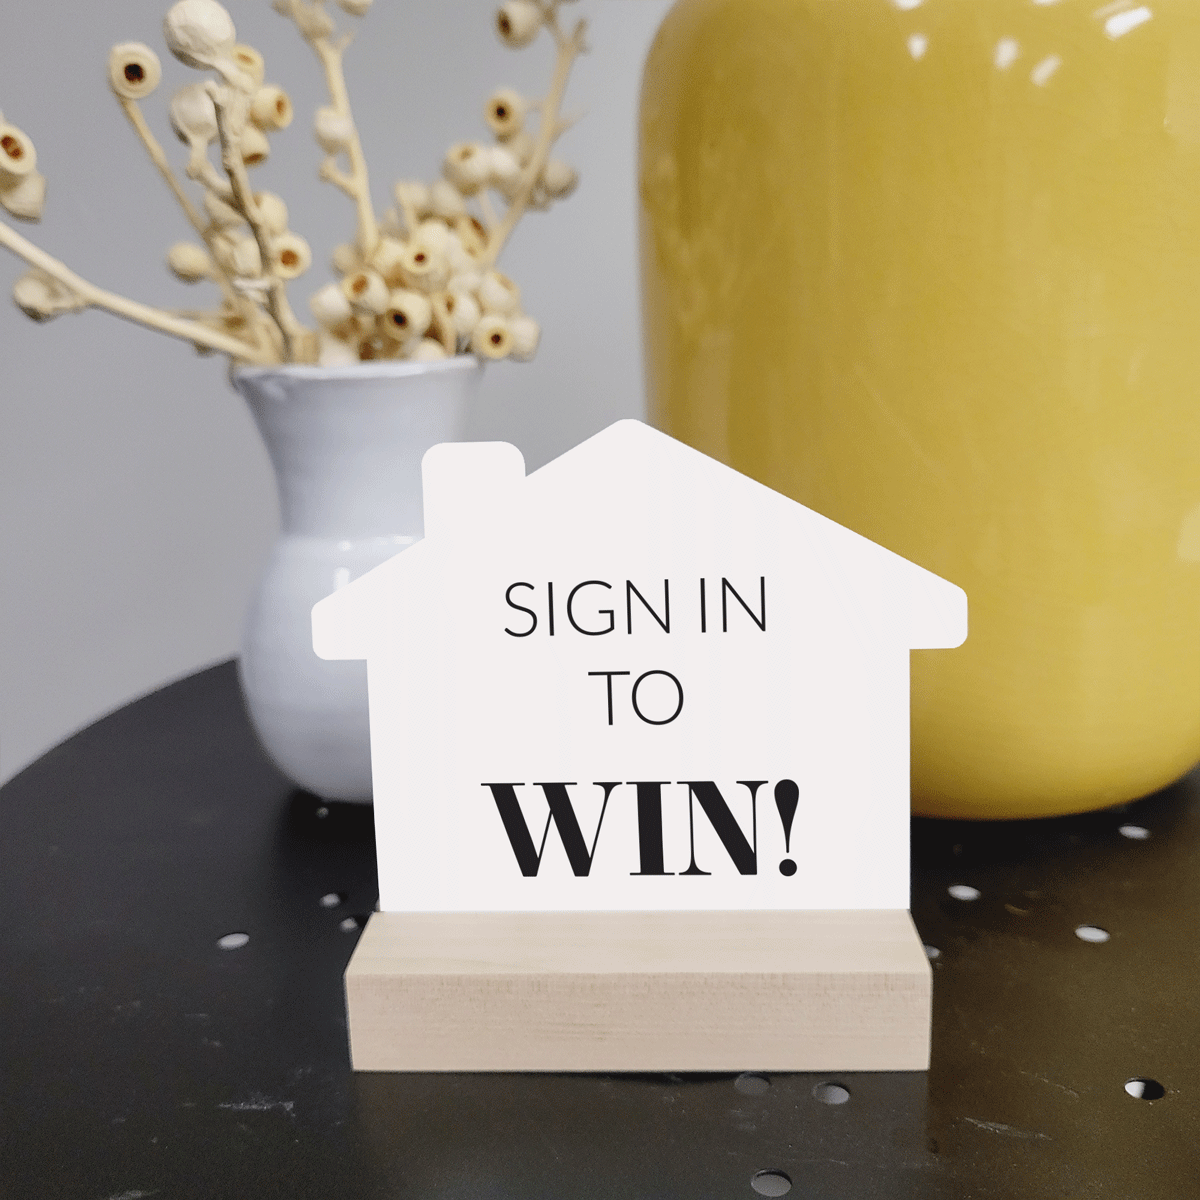 4x4 House - Sign In to WIN!